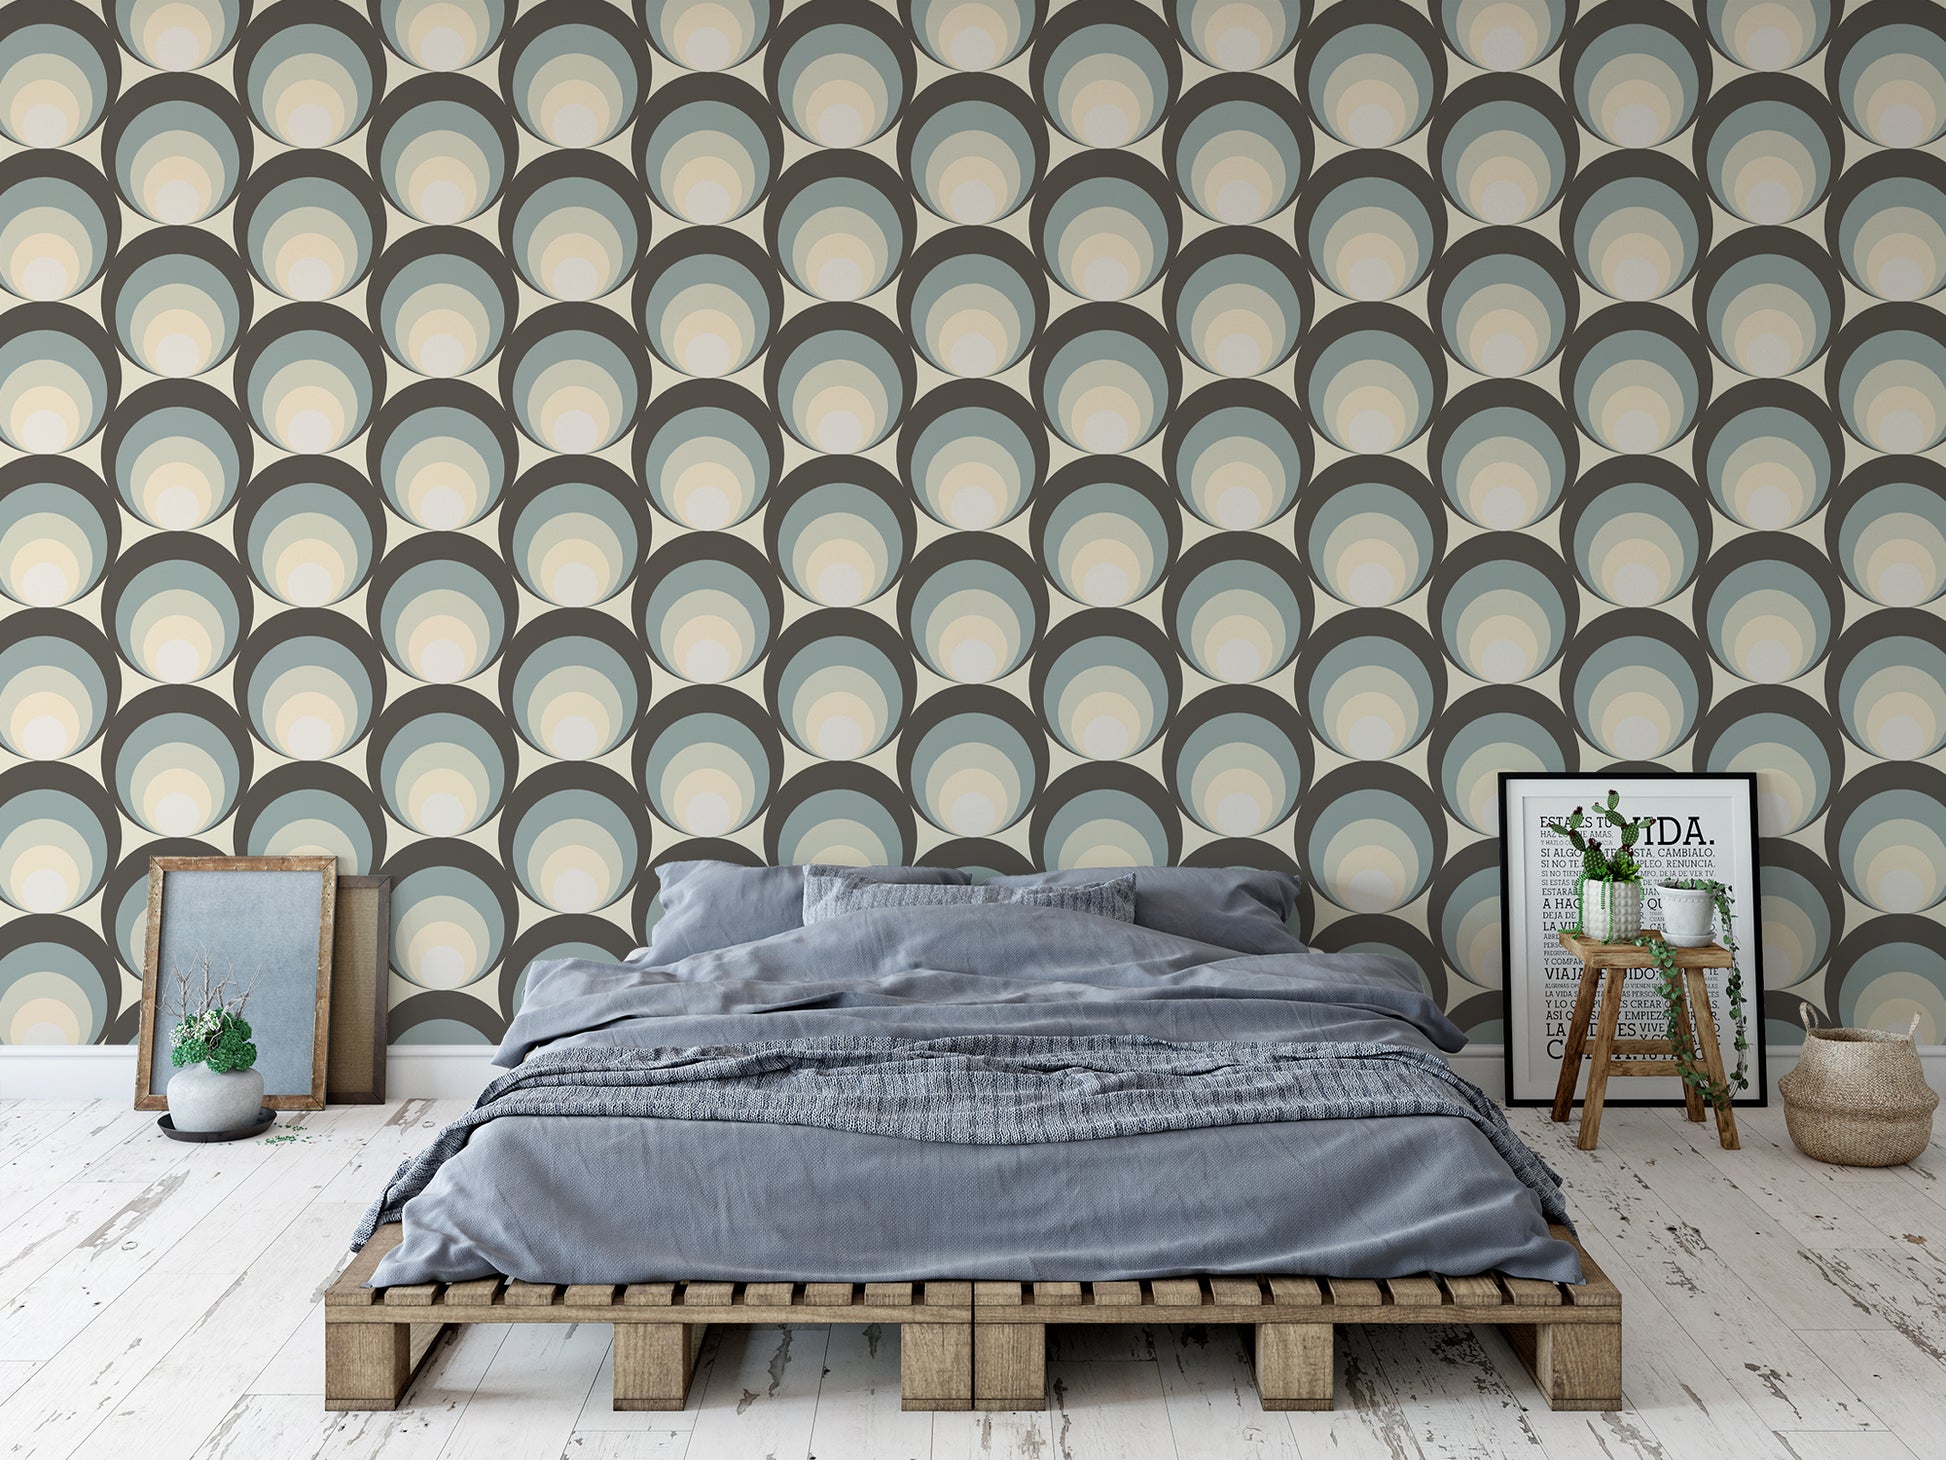 Christine - Retro Overlapping Circles Wallpaper: Elevate your space with captivating circles